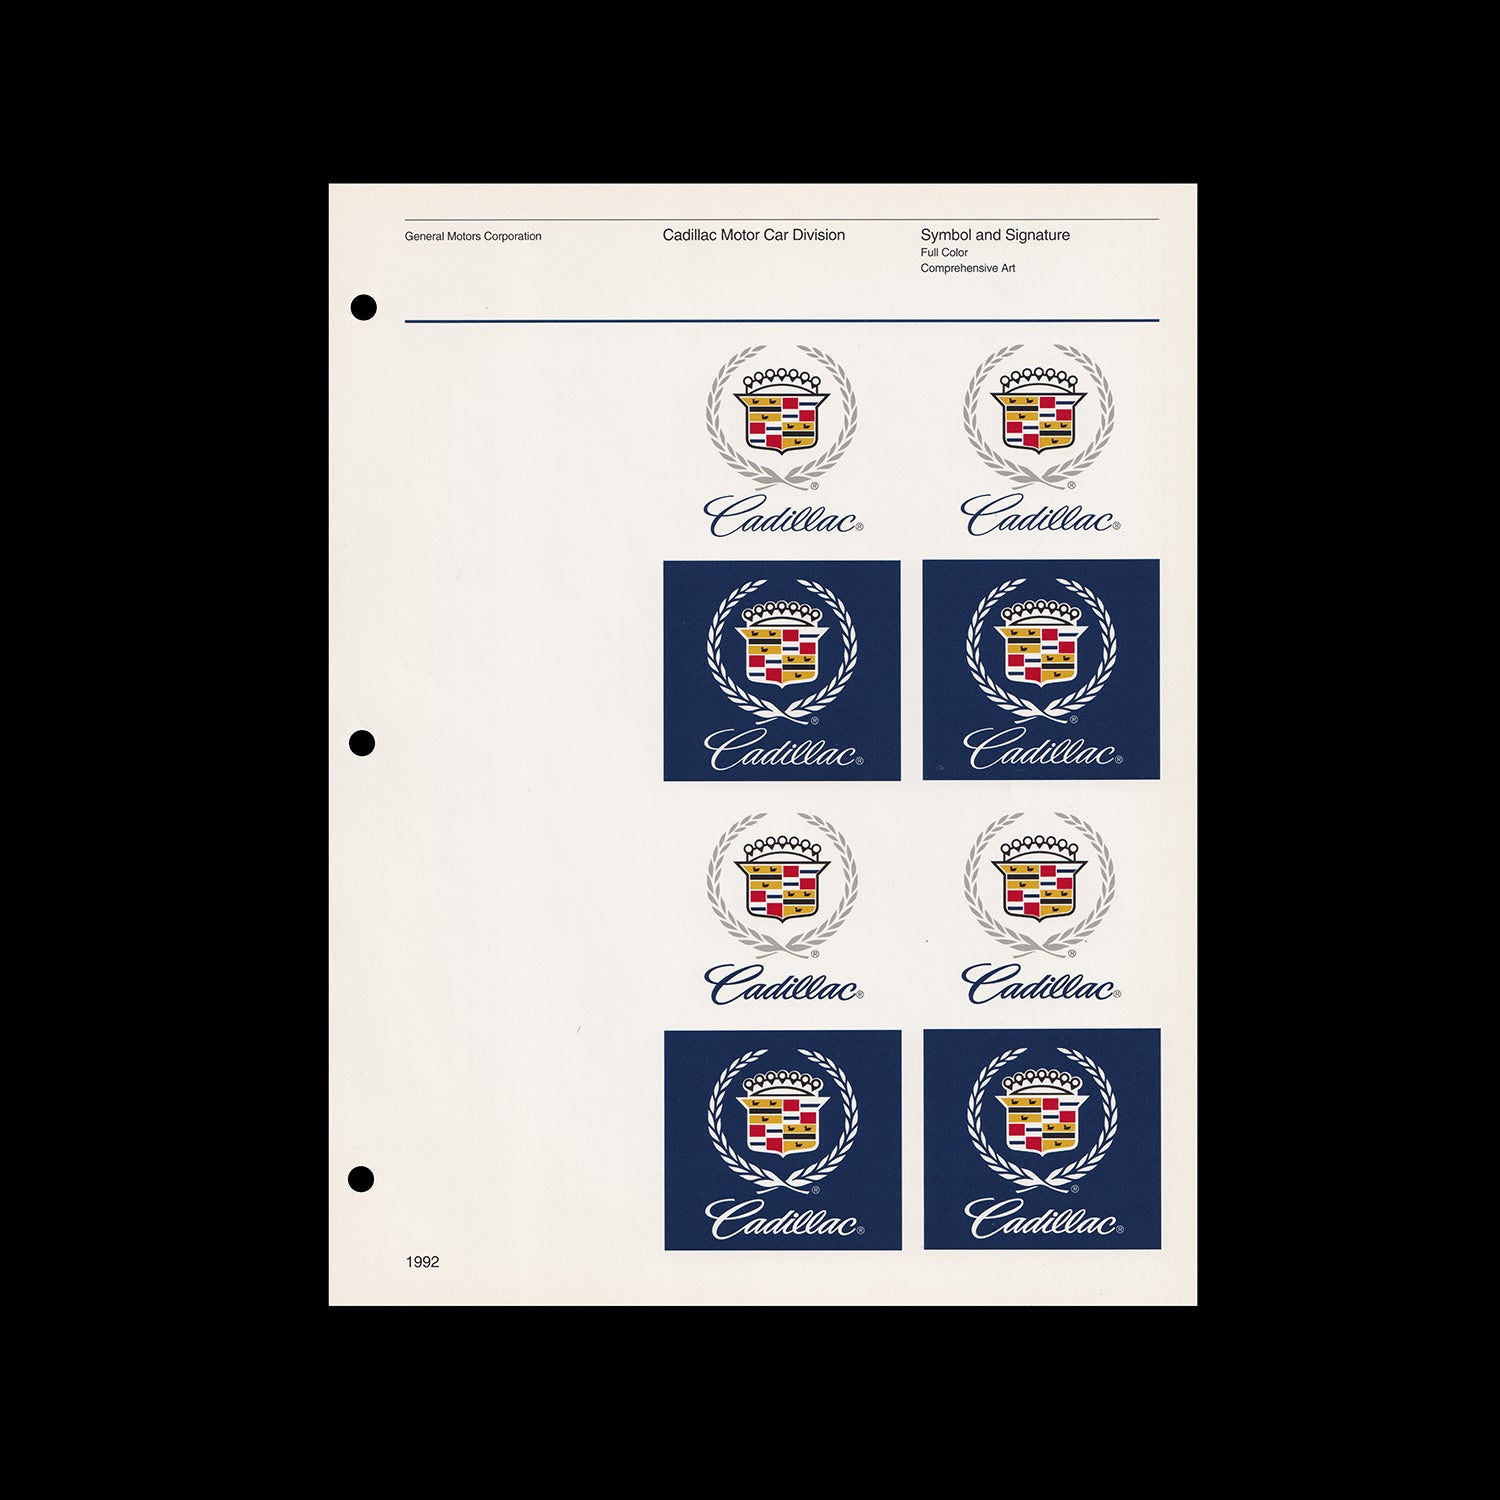 Cadillac Identification Guidelines Manual, 1992